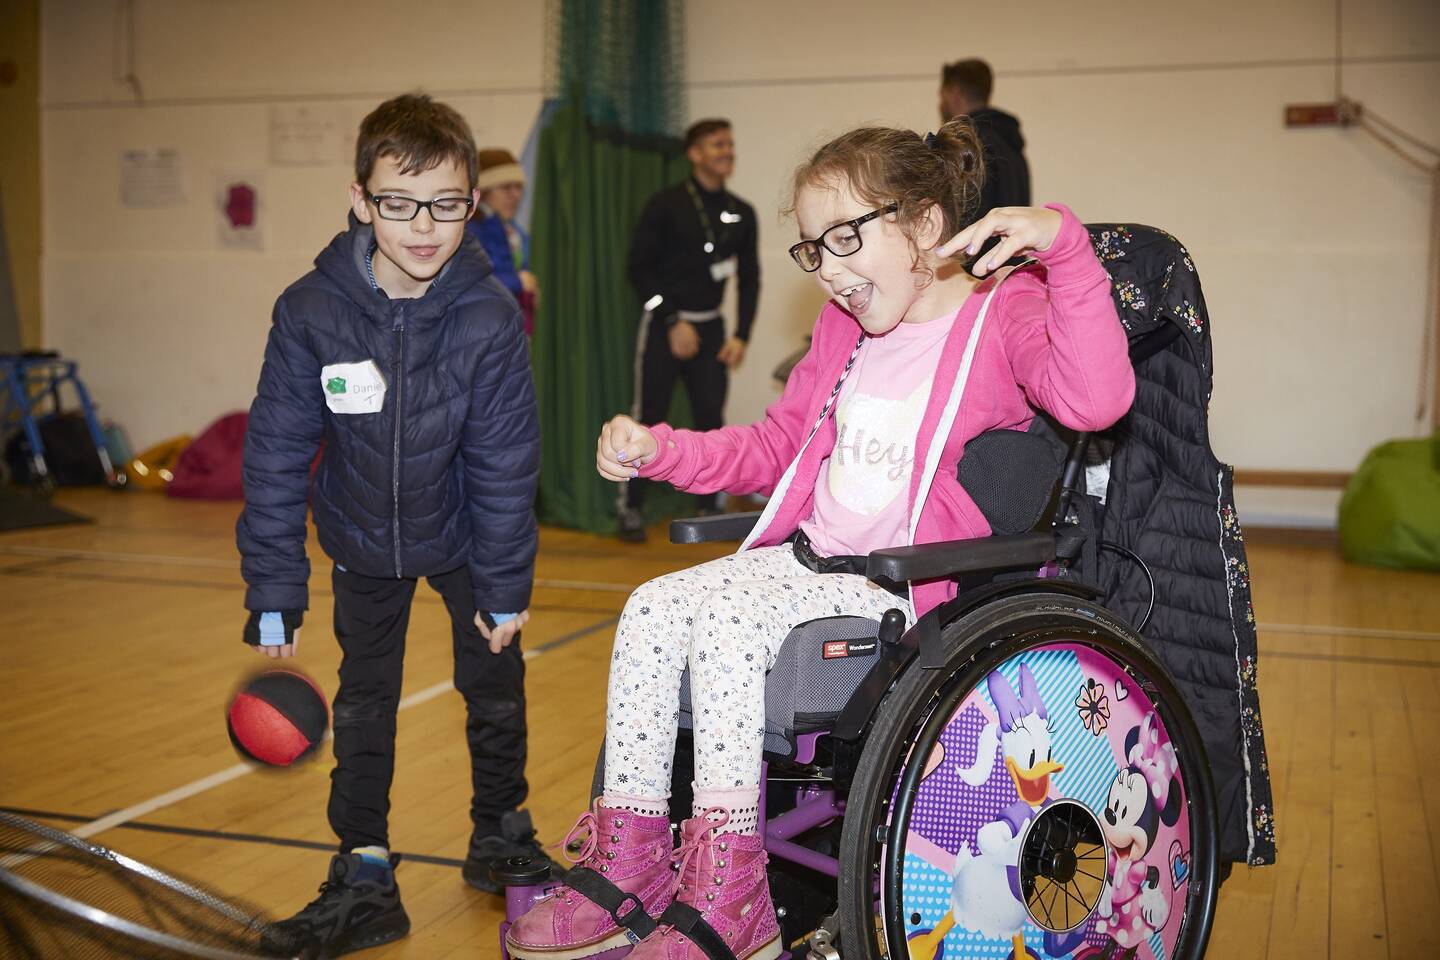 A disabled girl with her brother playing with a ball